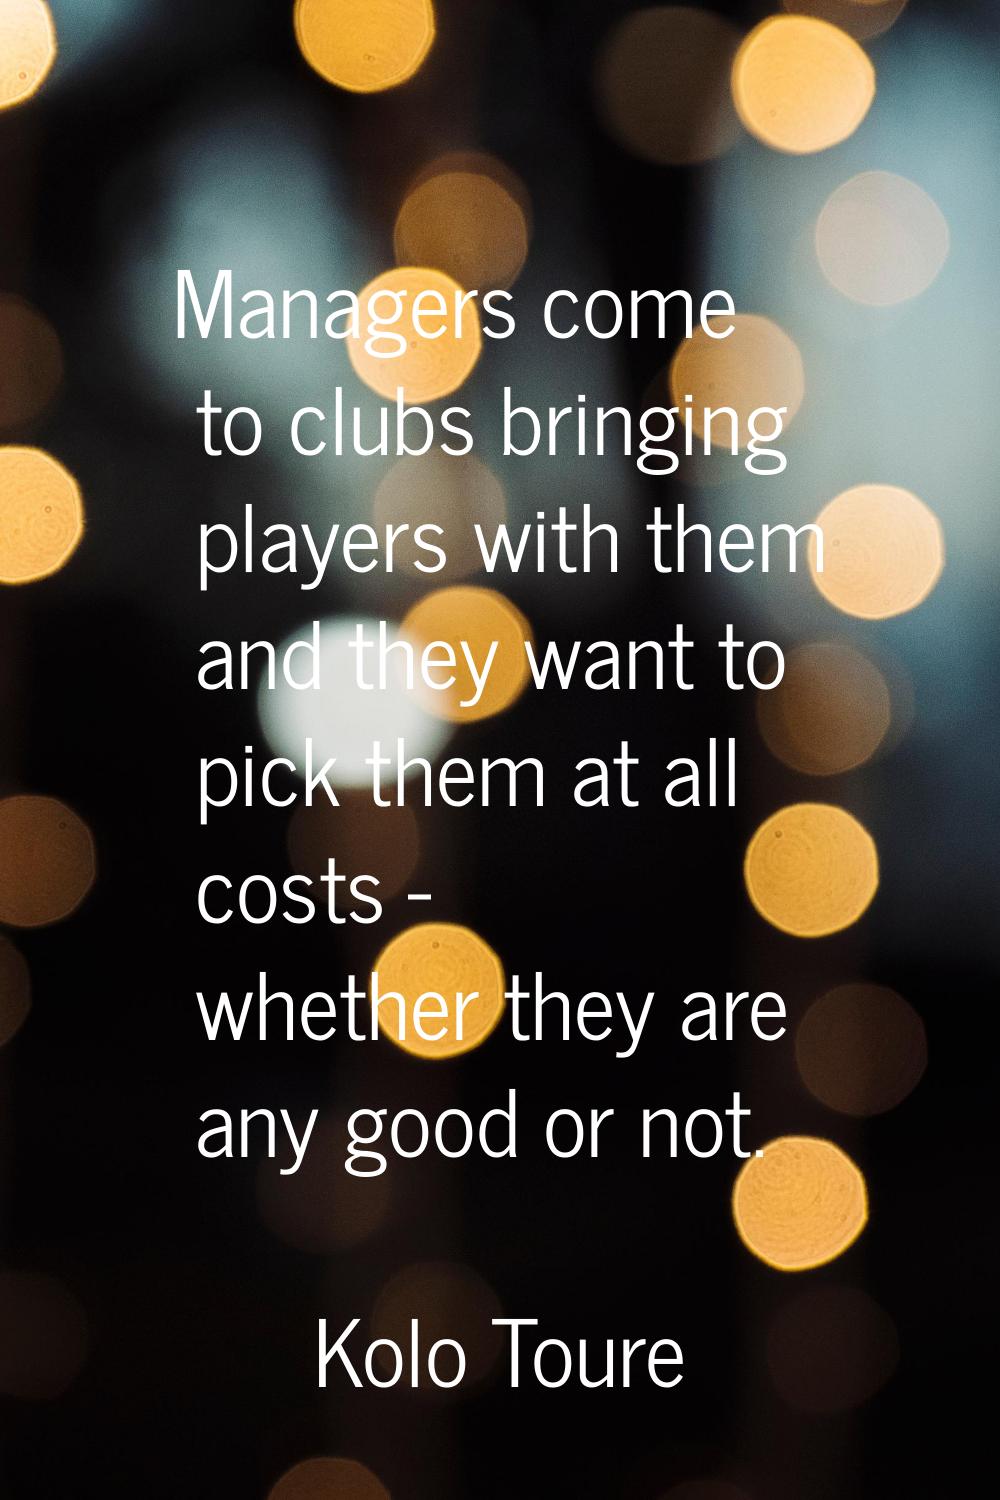 Managers come to clubs bringing players with them and they want to pick them at all costs - whether